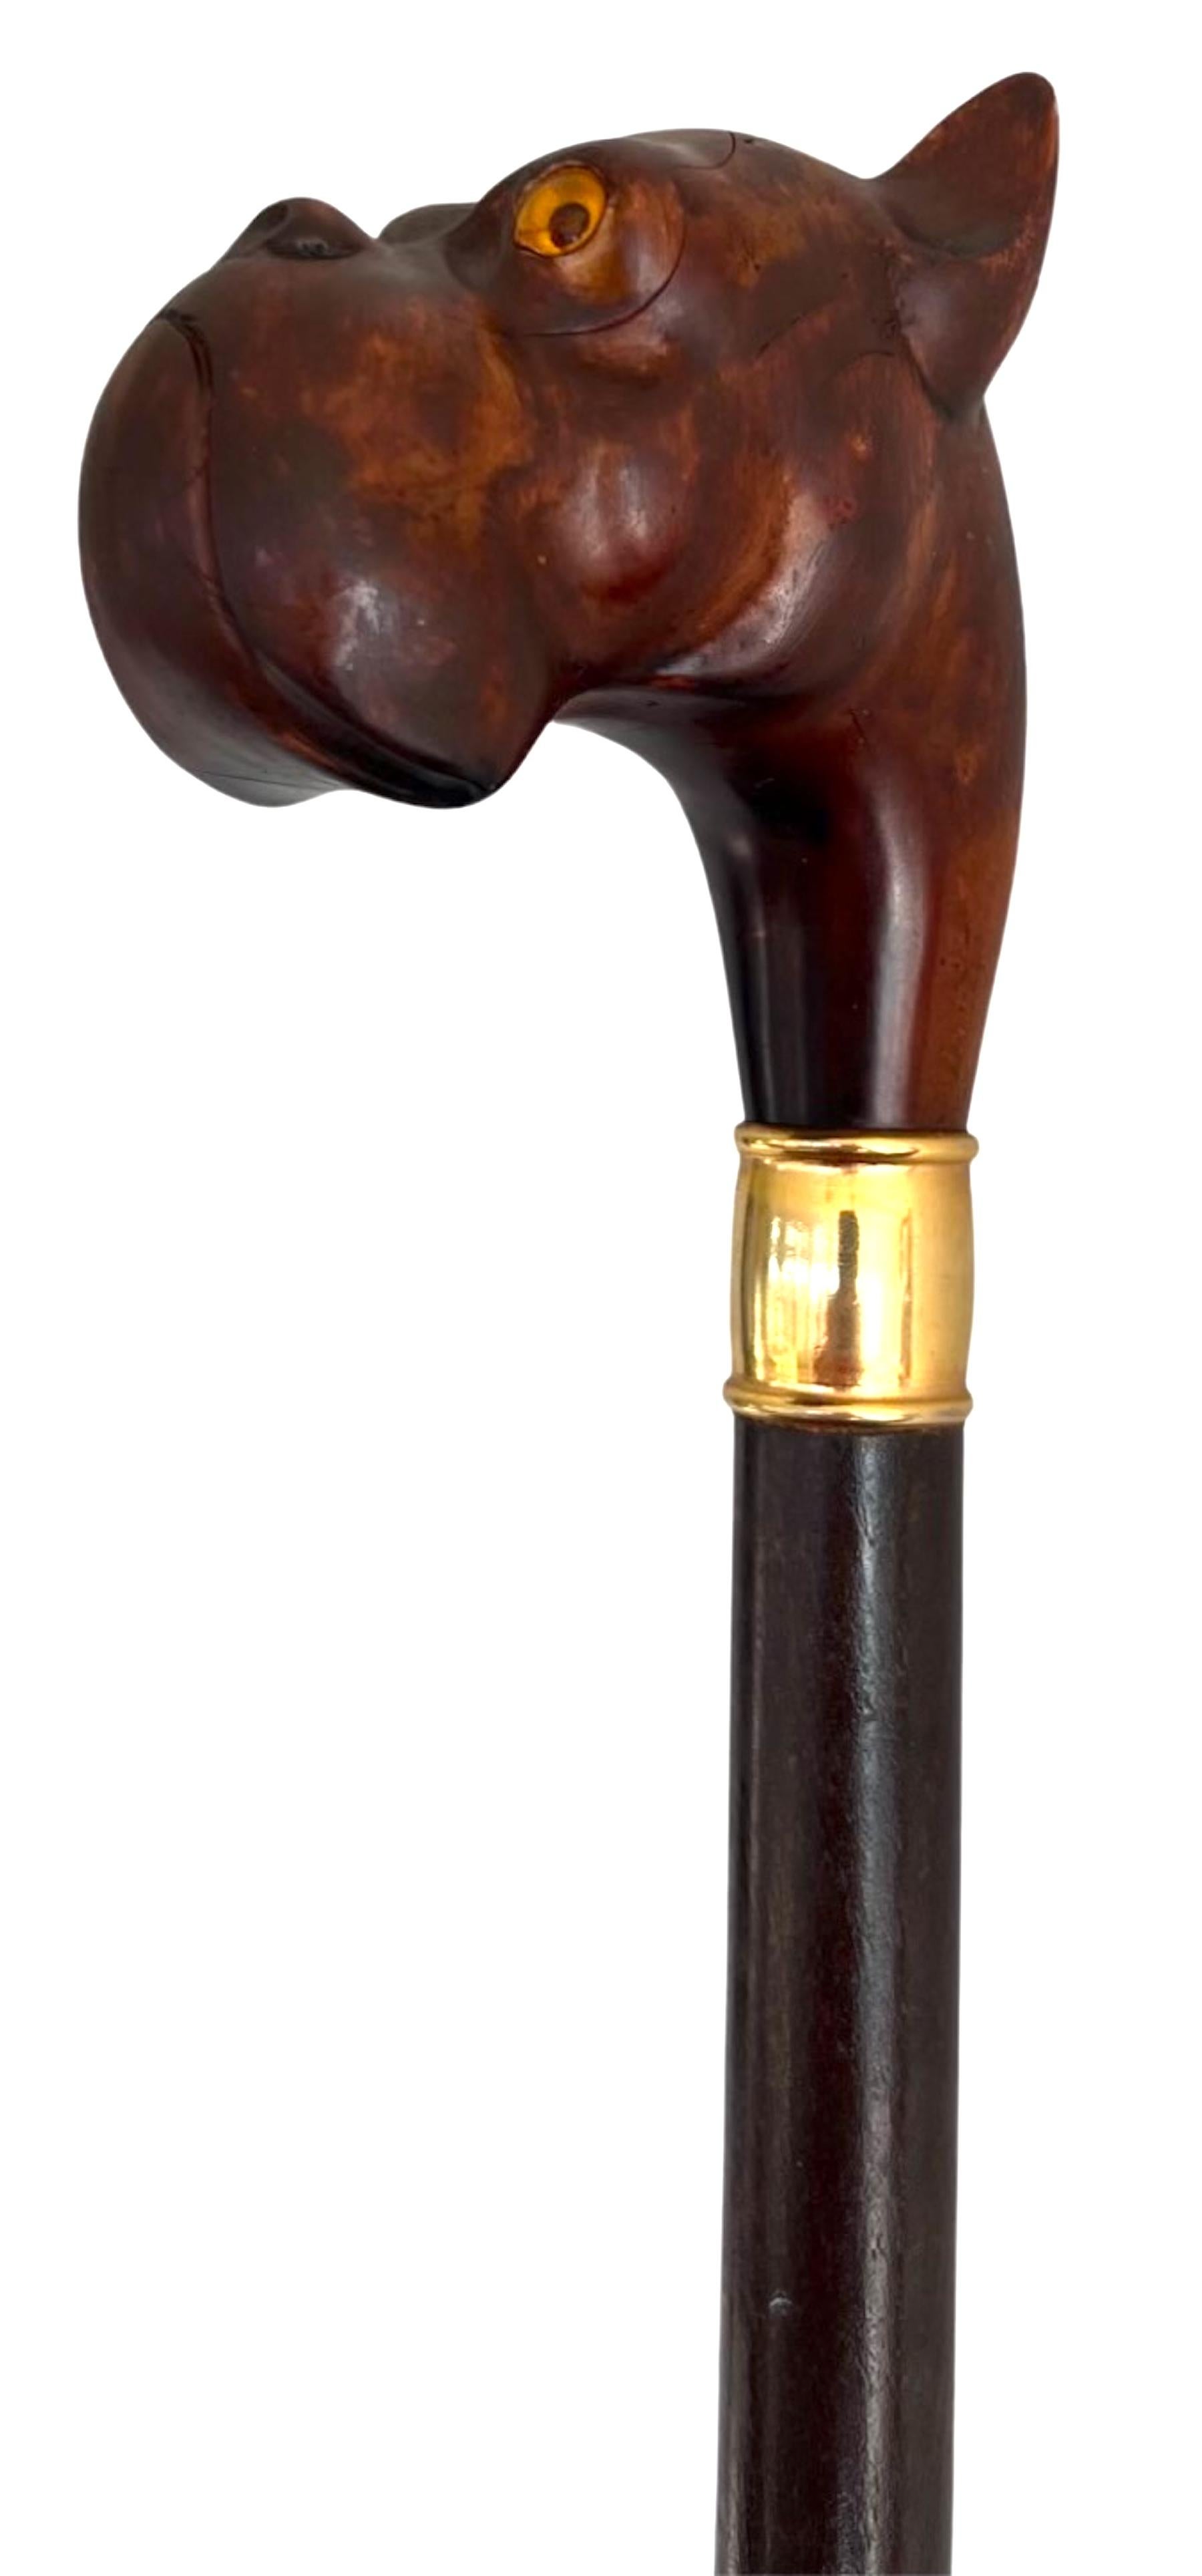 Early 20th Century Art Deco French Figural Bakelite Bulldog Cane/Walking Stick Solid Gold Ferrel For Sale